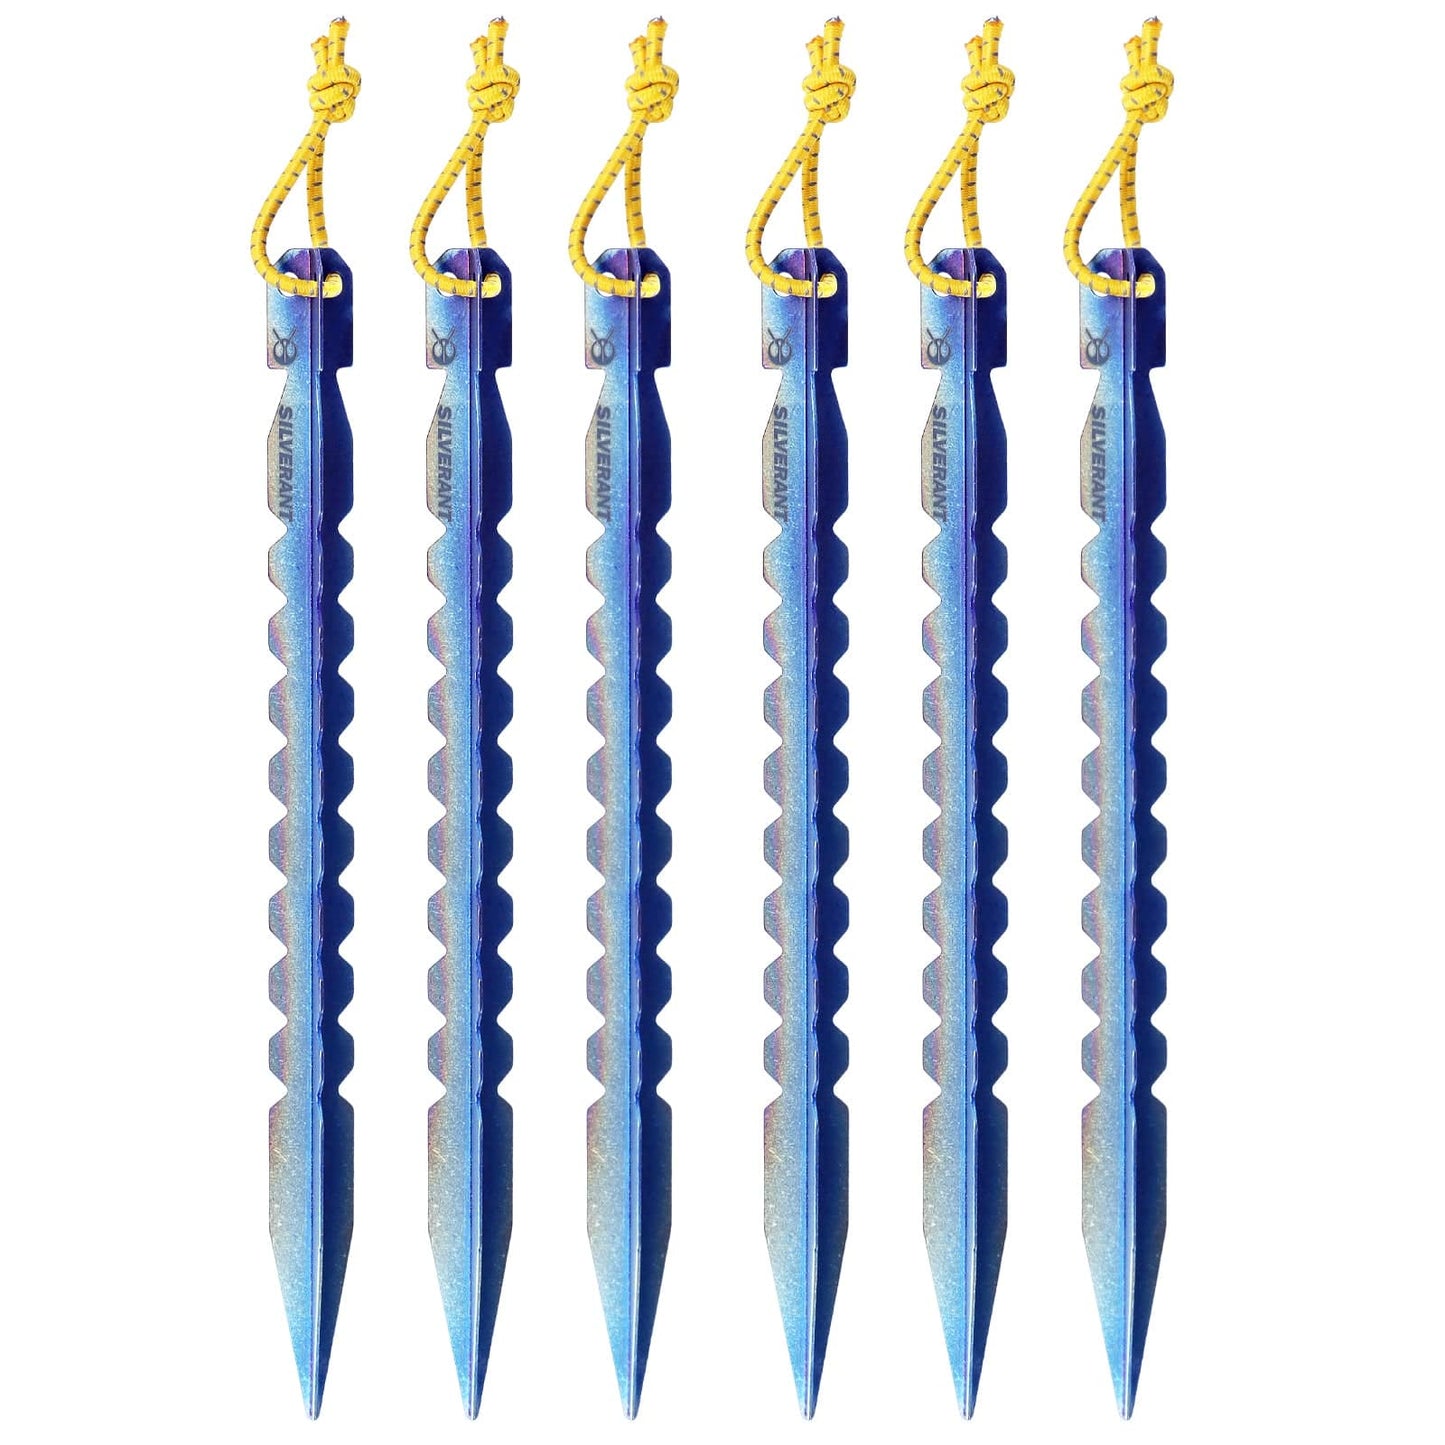 Titanium Y-Shape Tent Stakes - Large 6-Pack - SilverAnt Outdoors